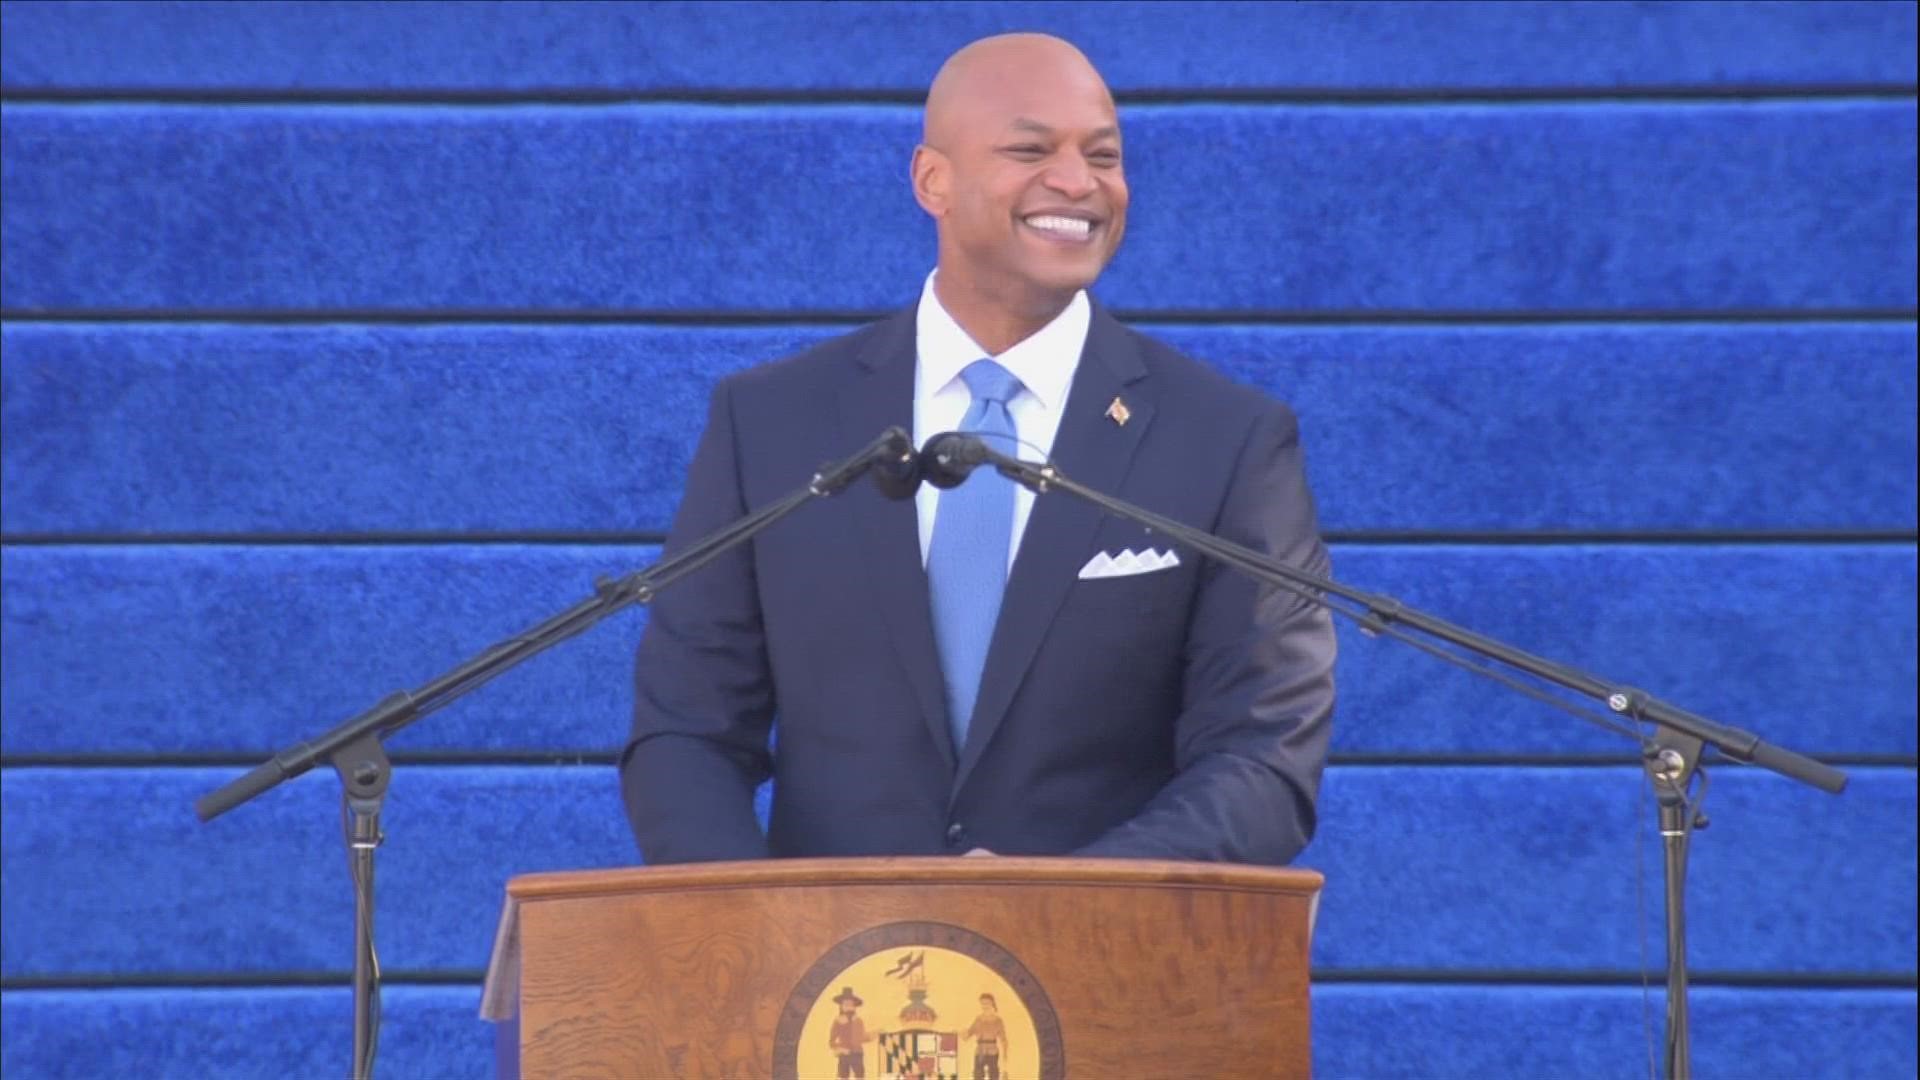 Wes Moore made history when he became Maryland's first Black governor, only the third African-American to hold a governor’s seat in American history.